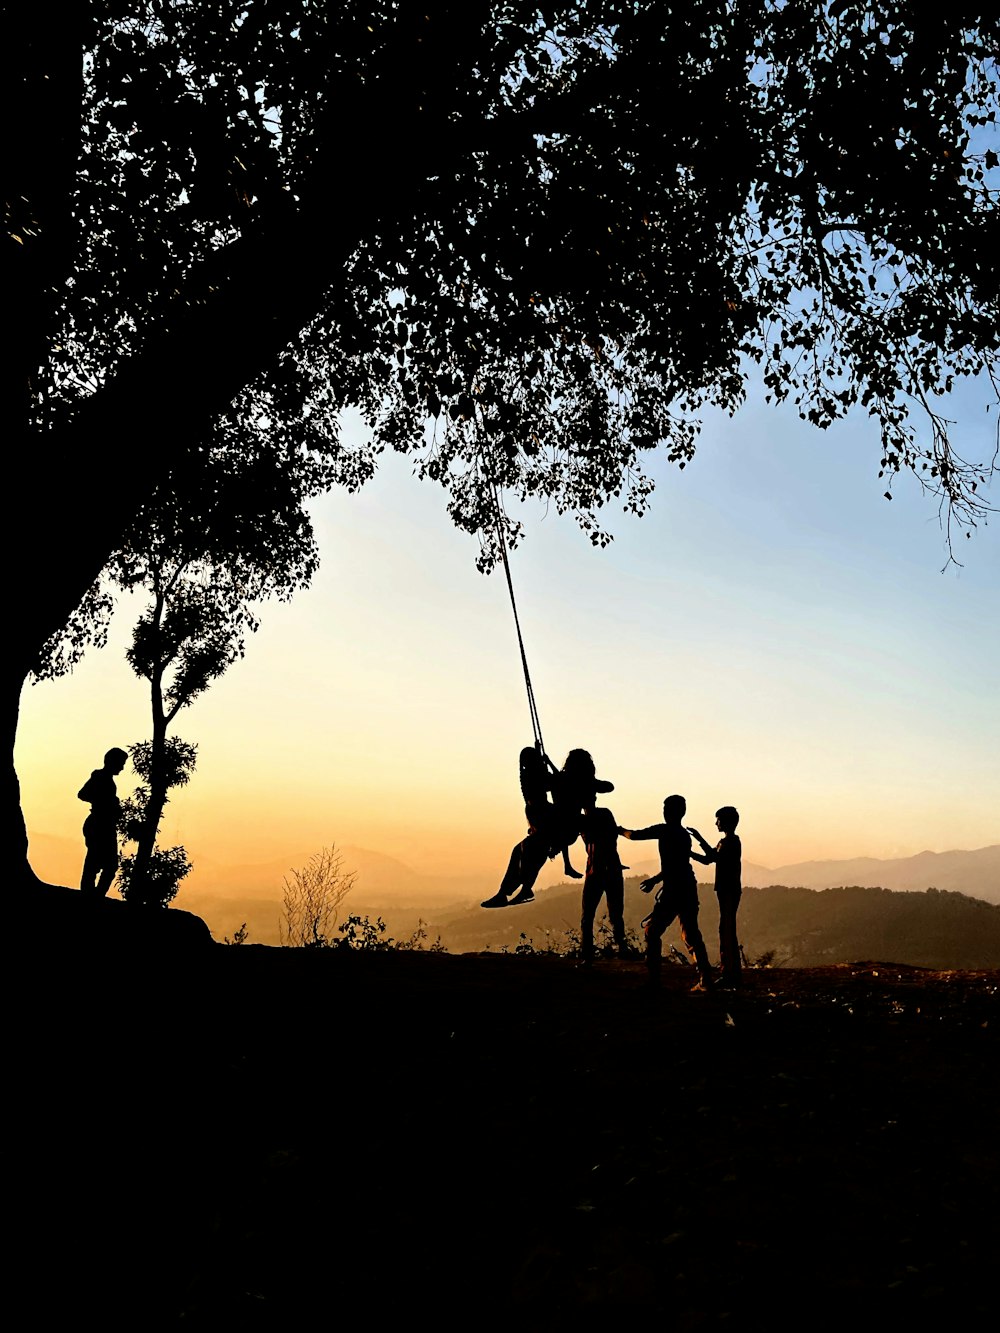 silhouette of people on swing under tree during sunset